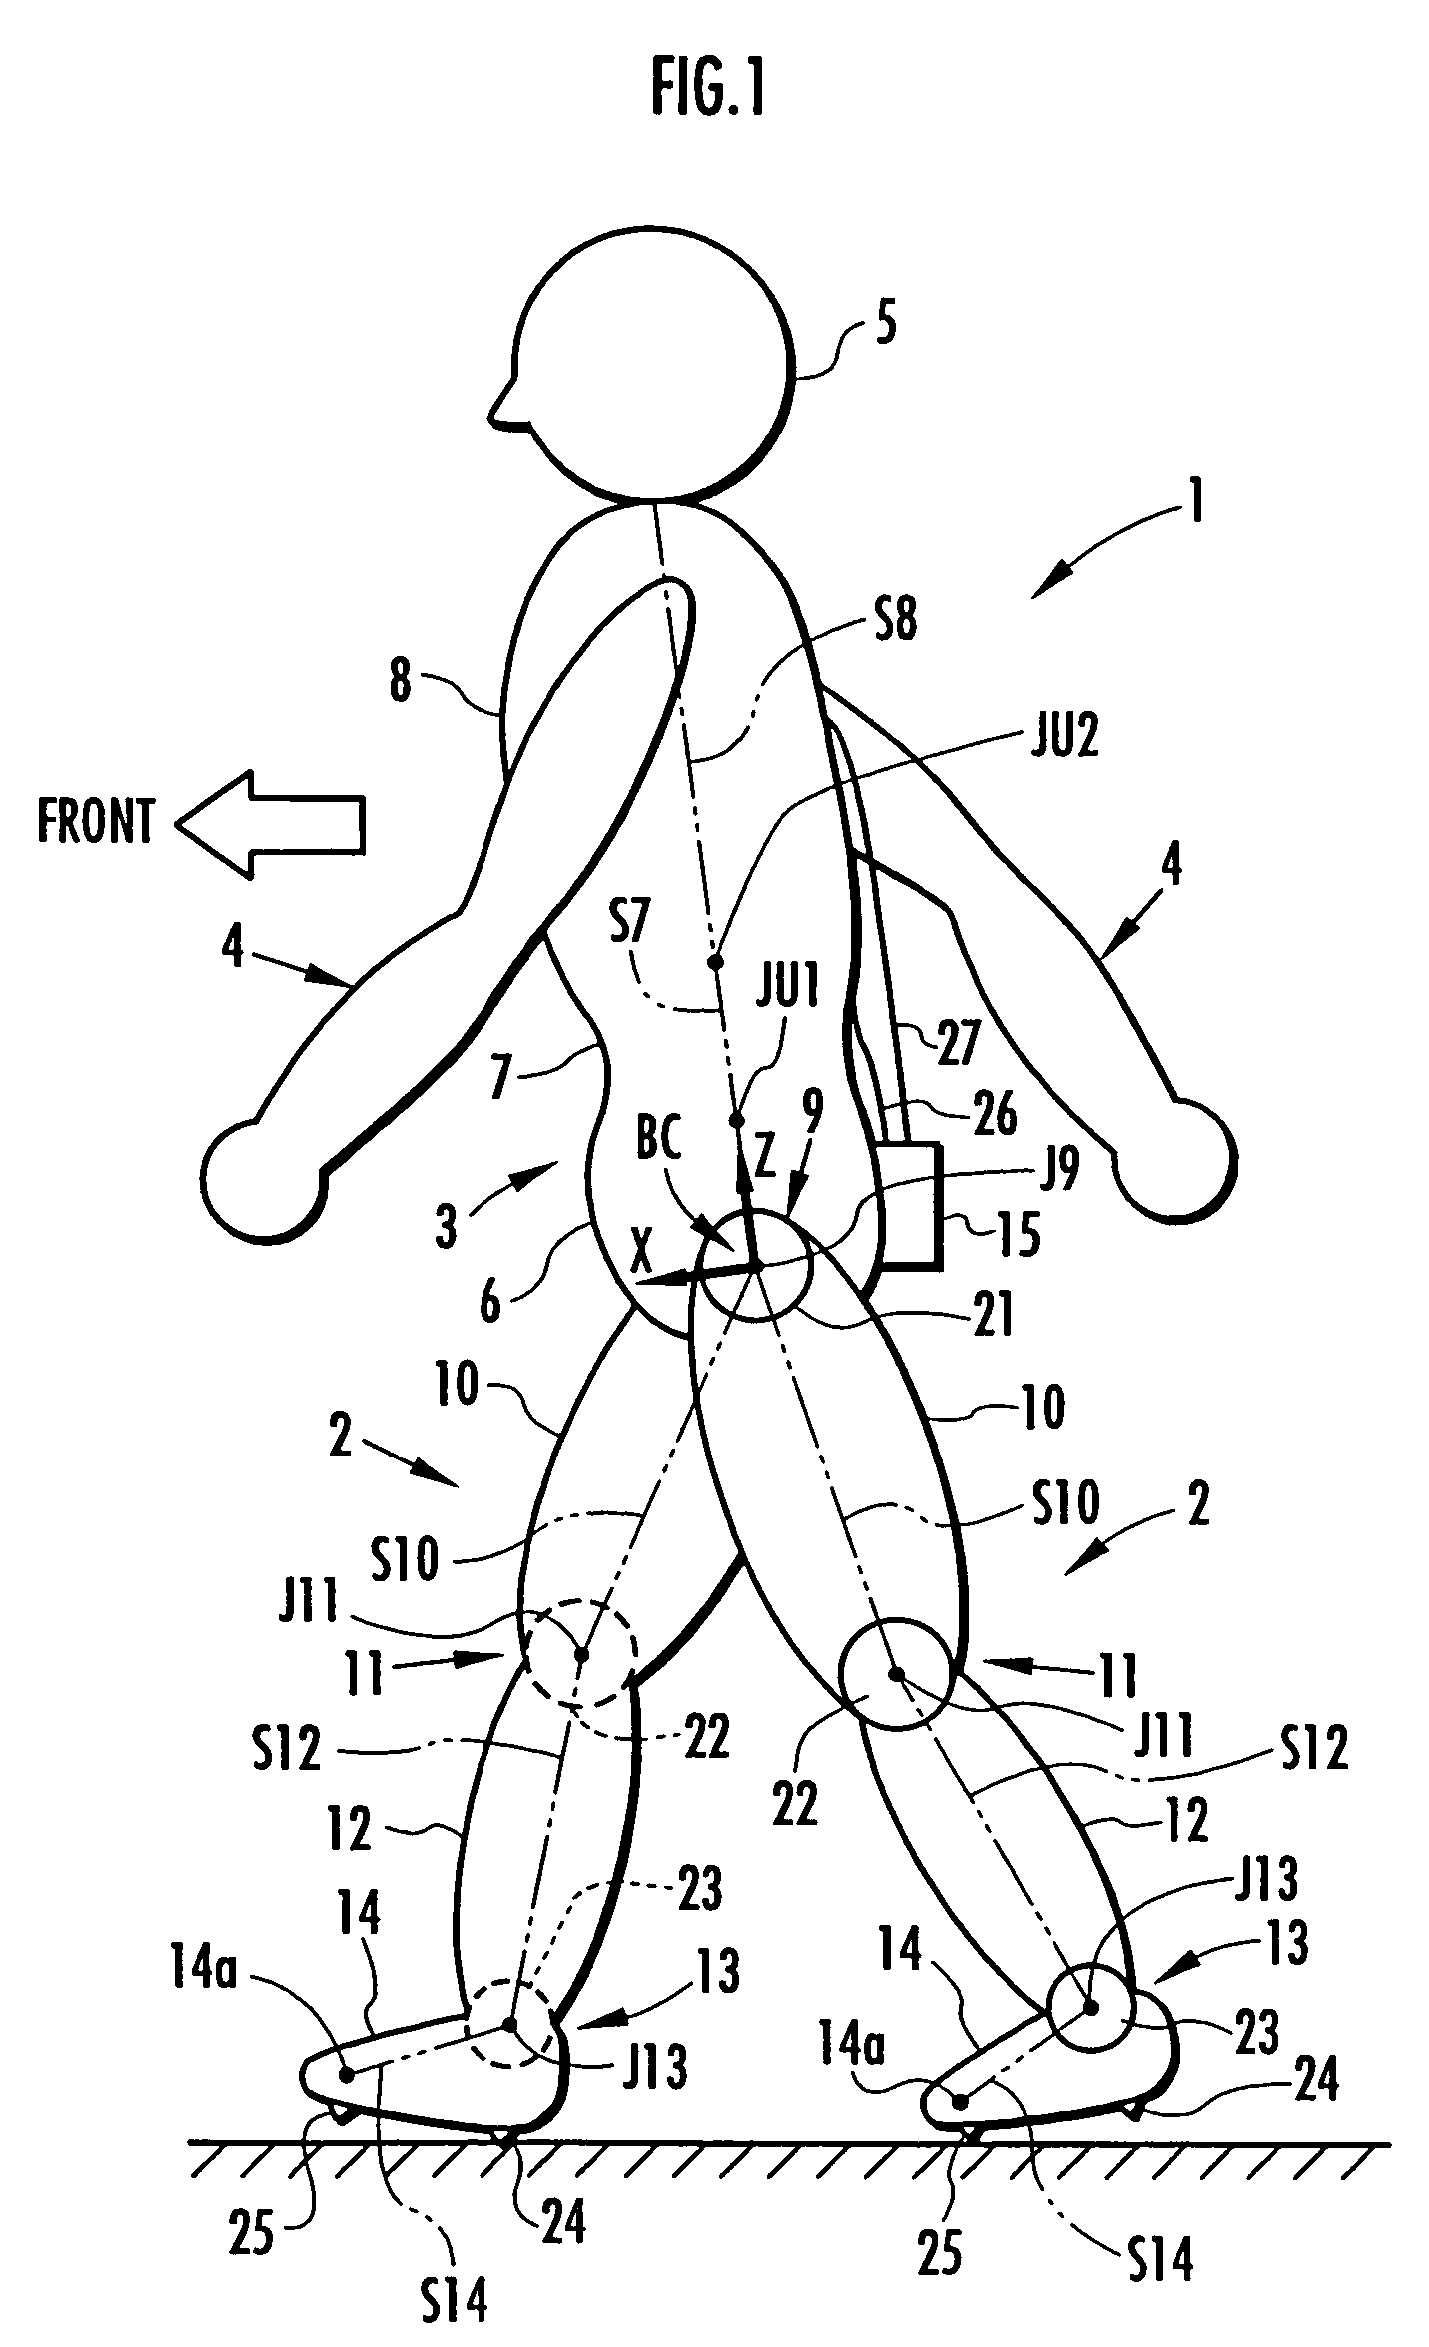 Method of estimating joint moment of bipedal walking body